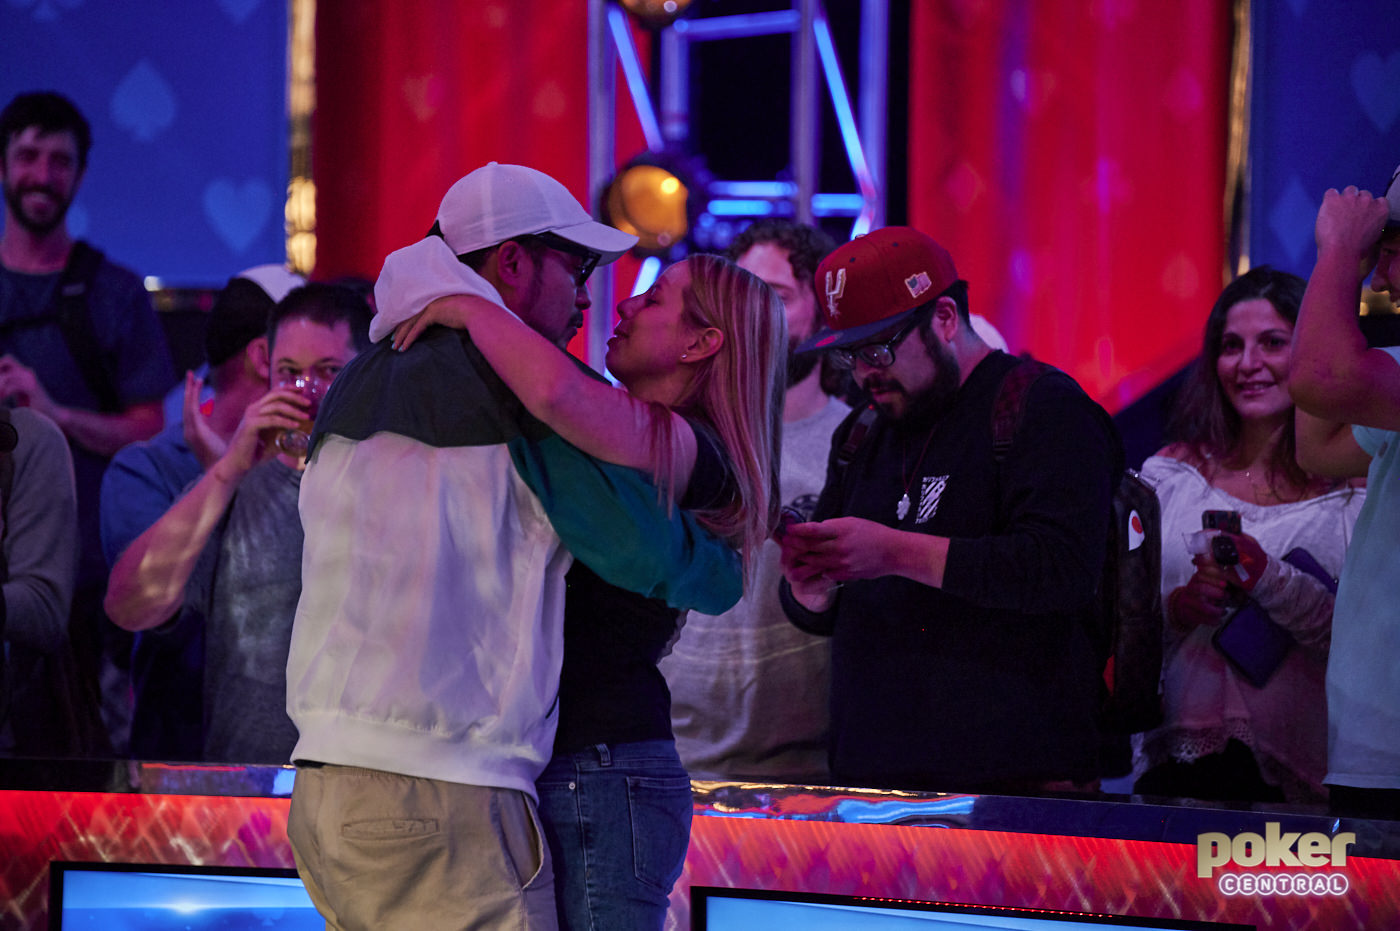 Phil Hui and his long-time girlfriend Loni Harwood share an intimate moment right after the final hand.